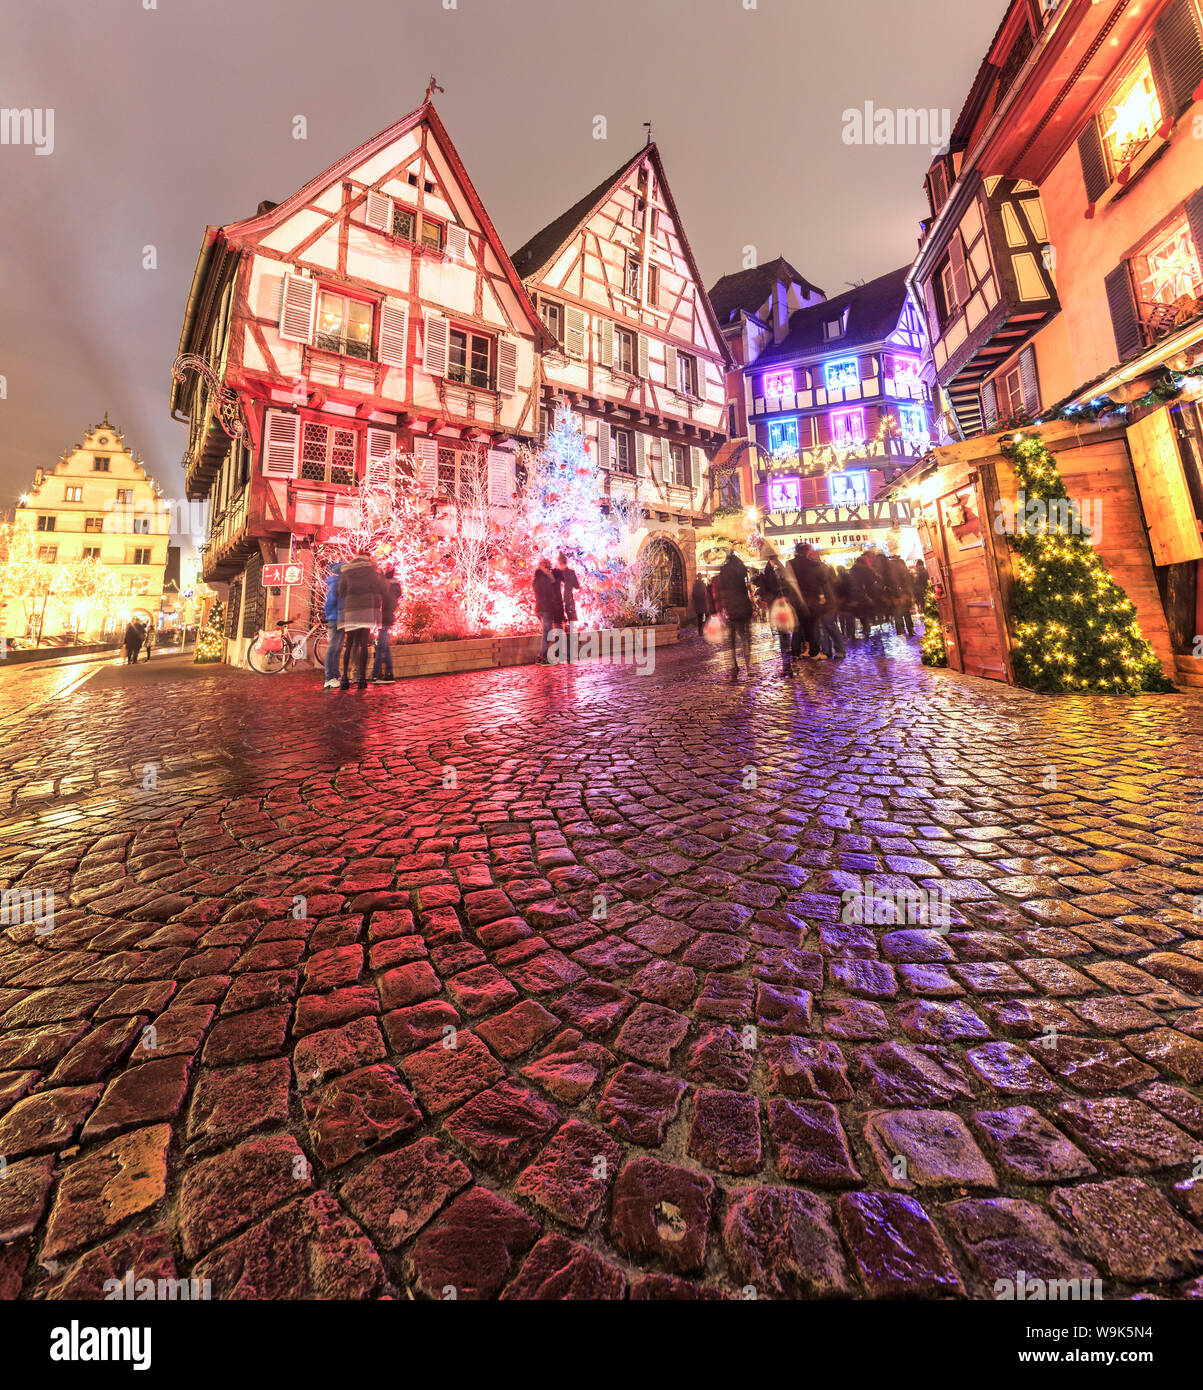 Panorama of typical houses enriched by Christmas ornaments and lights at dusk, Colmar, Haut-Rhin department, Alsace, France, Europe Stock Photo